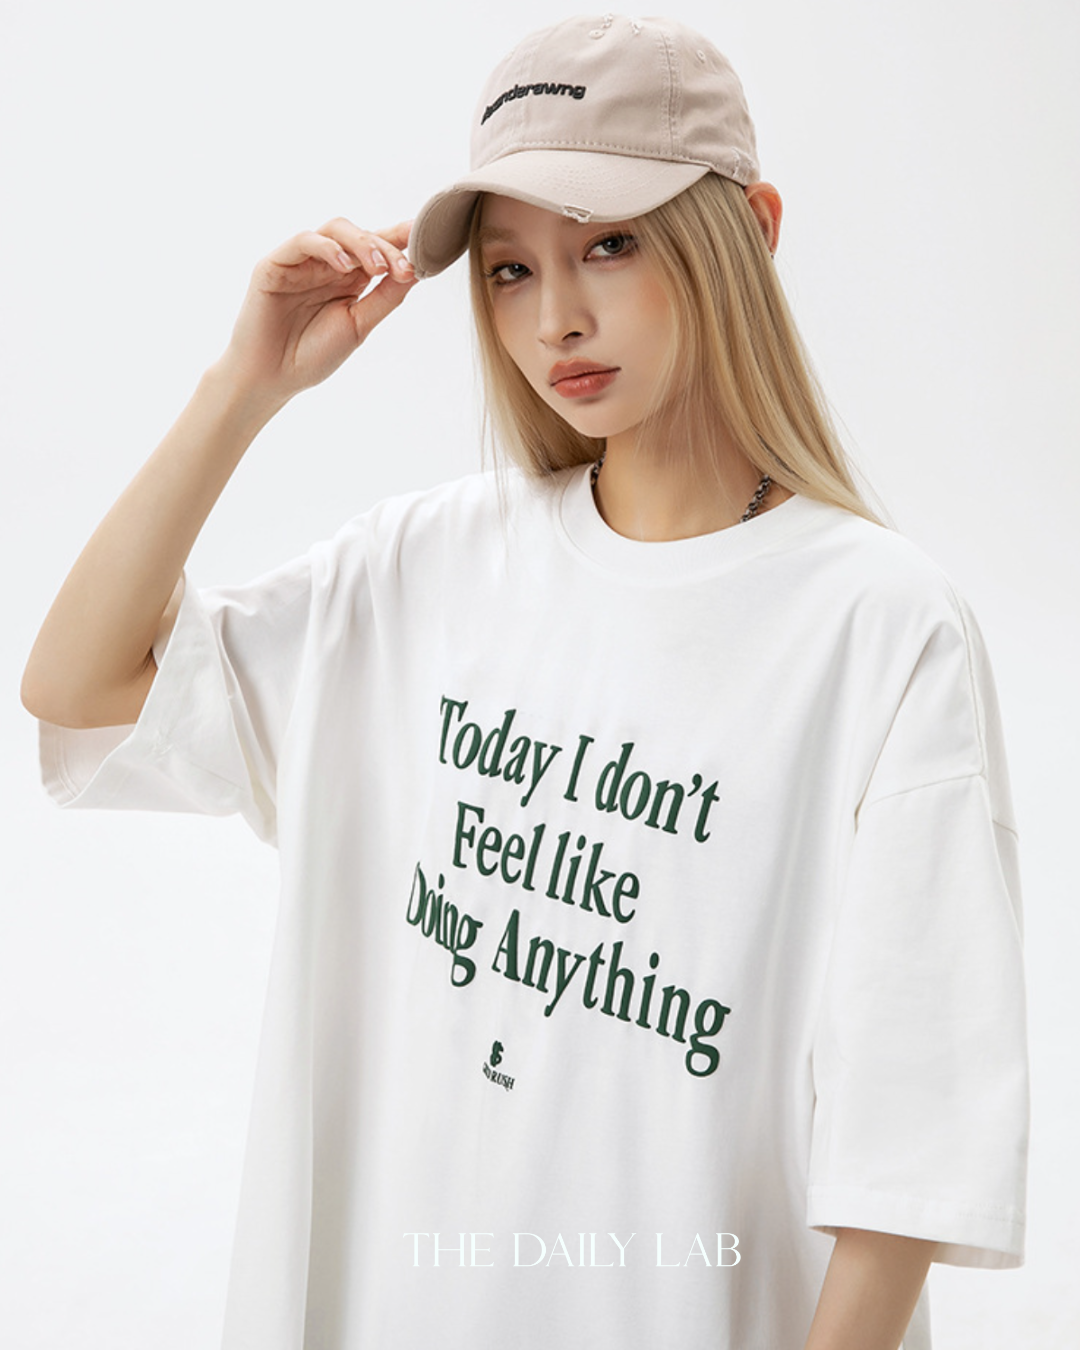 200G Today Oversized Tee in White